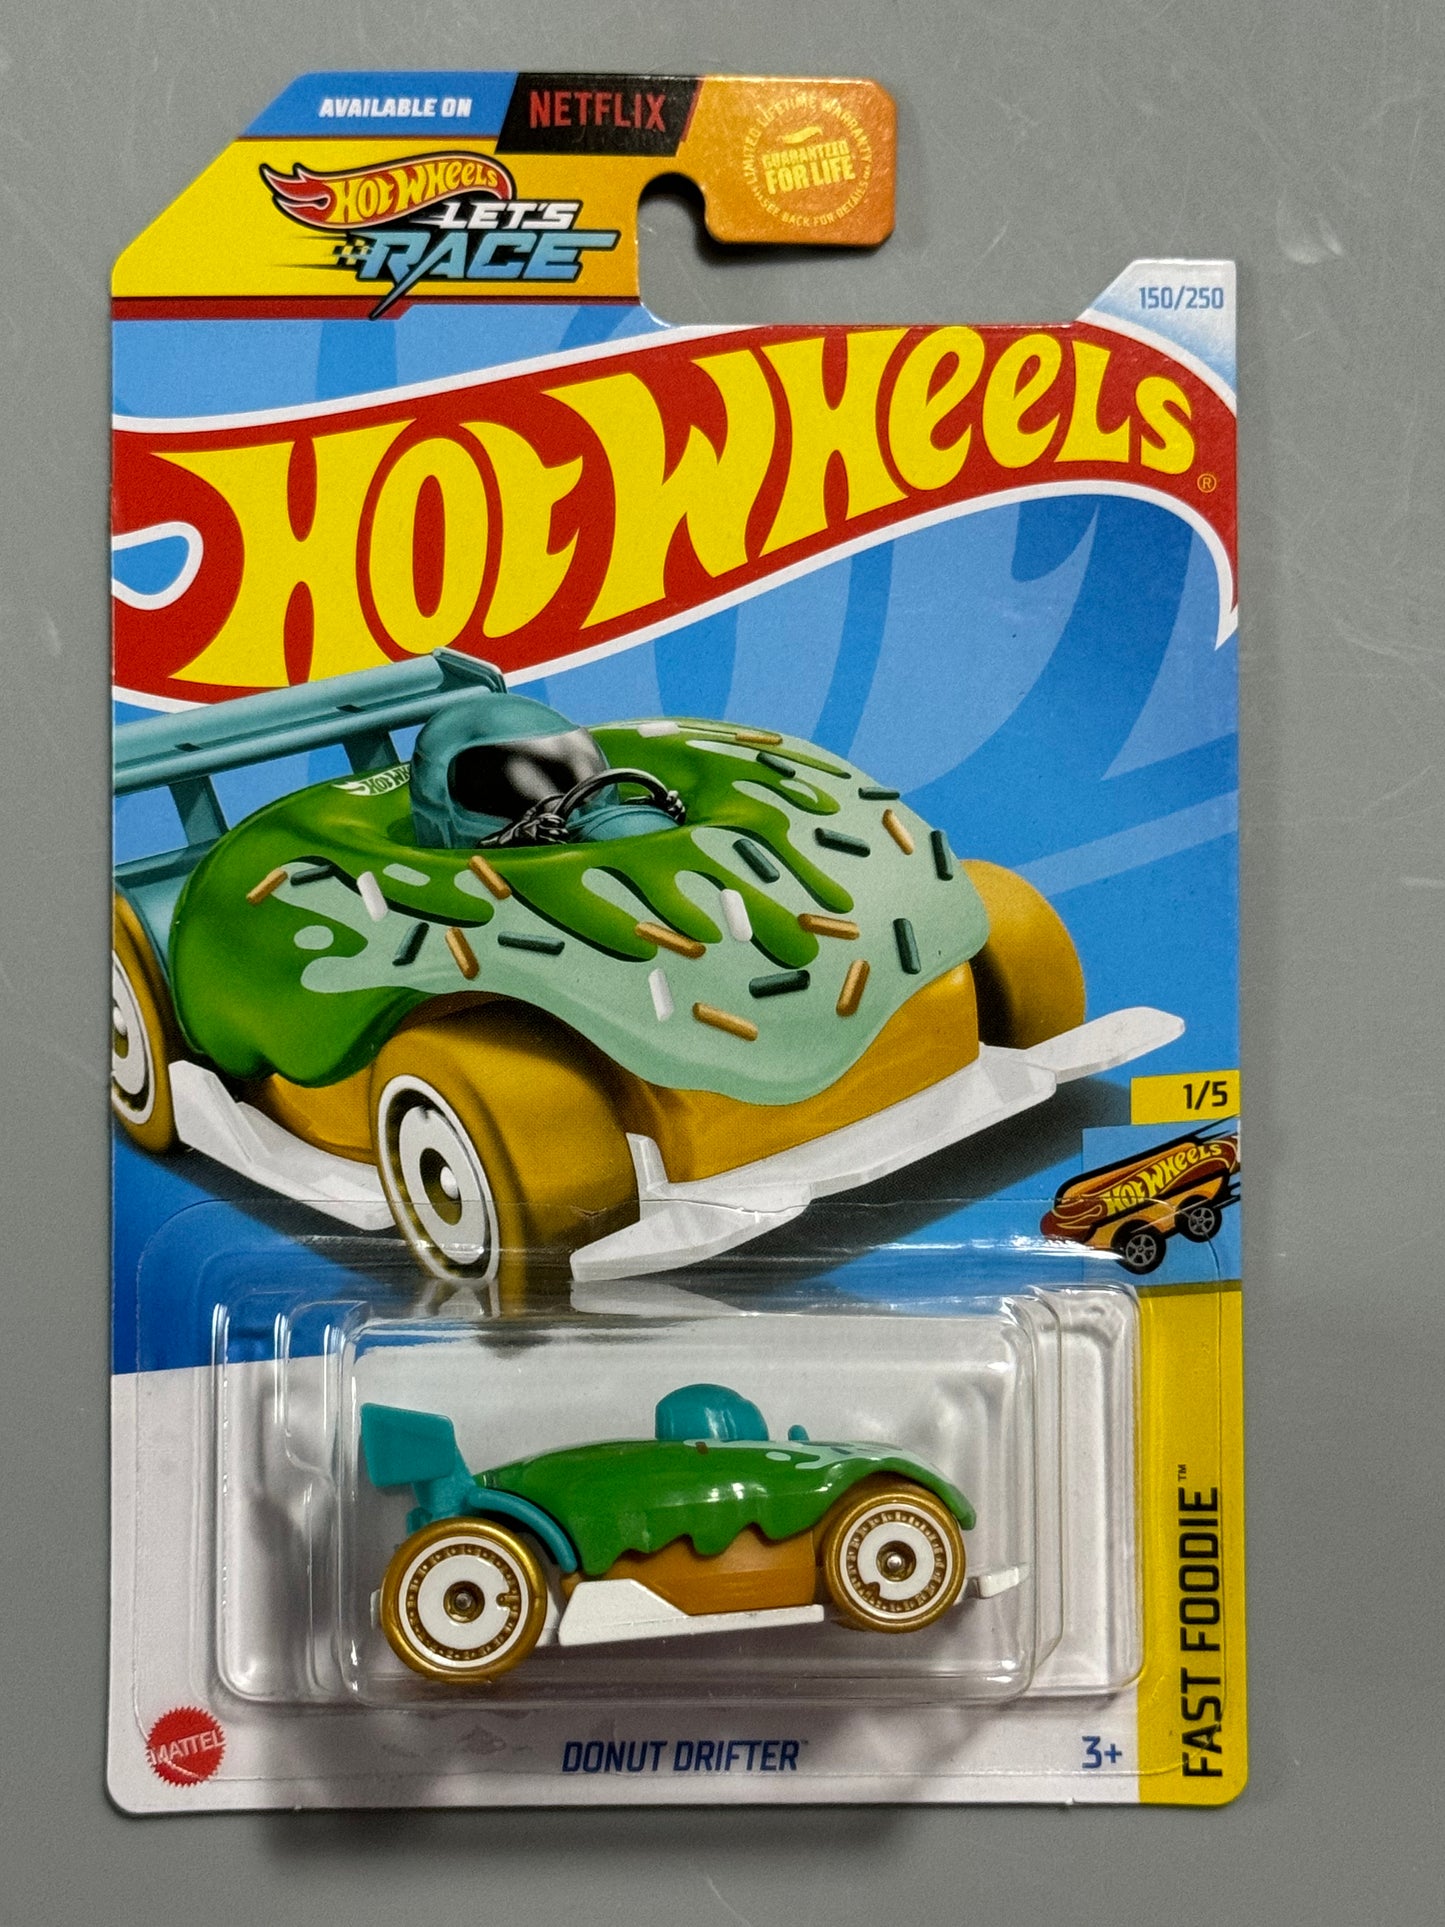 Hot Wheels 2024 Let's Race Green Donut Drifter # 150/250 Fast Foodie # 1/5  - H Case